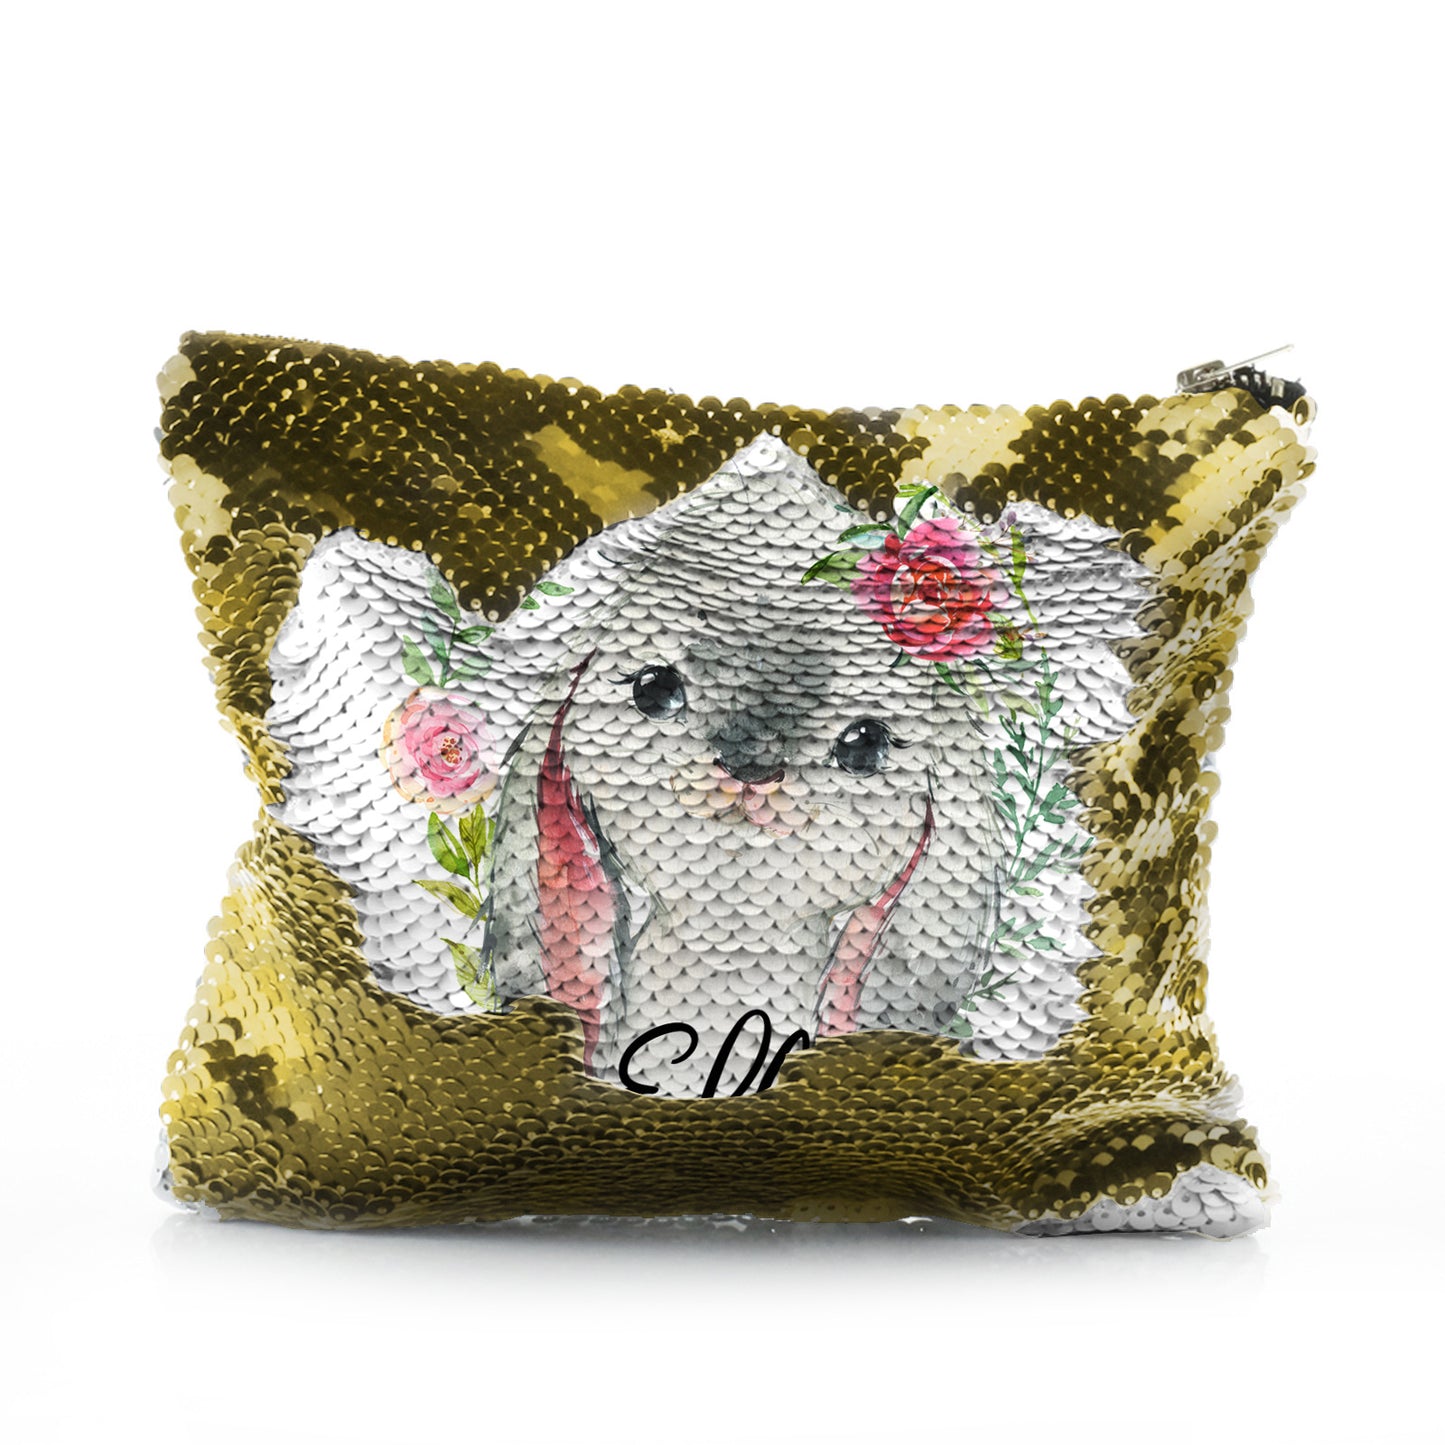 Personalised Sequin Zip Bag with Grey Rabbit Flower Wreath and Cute Text